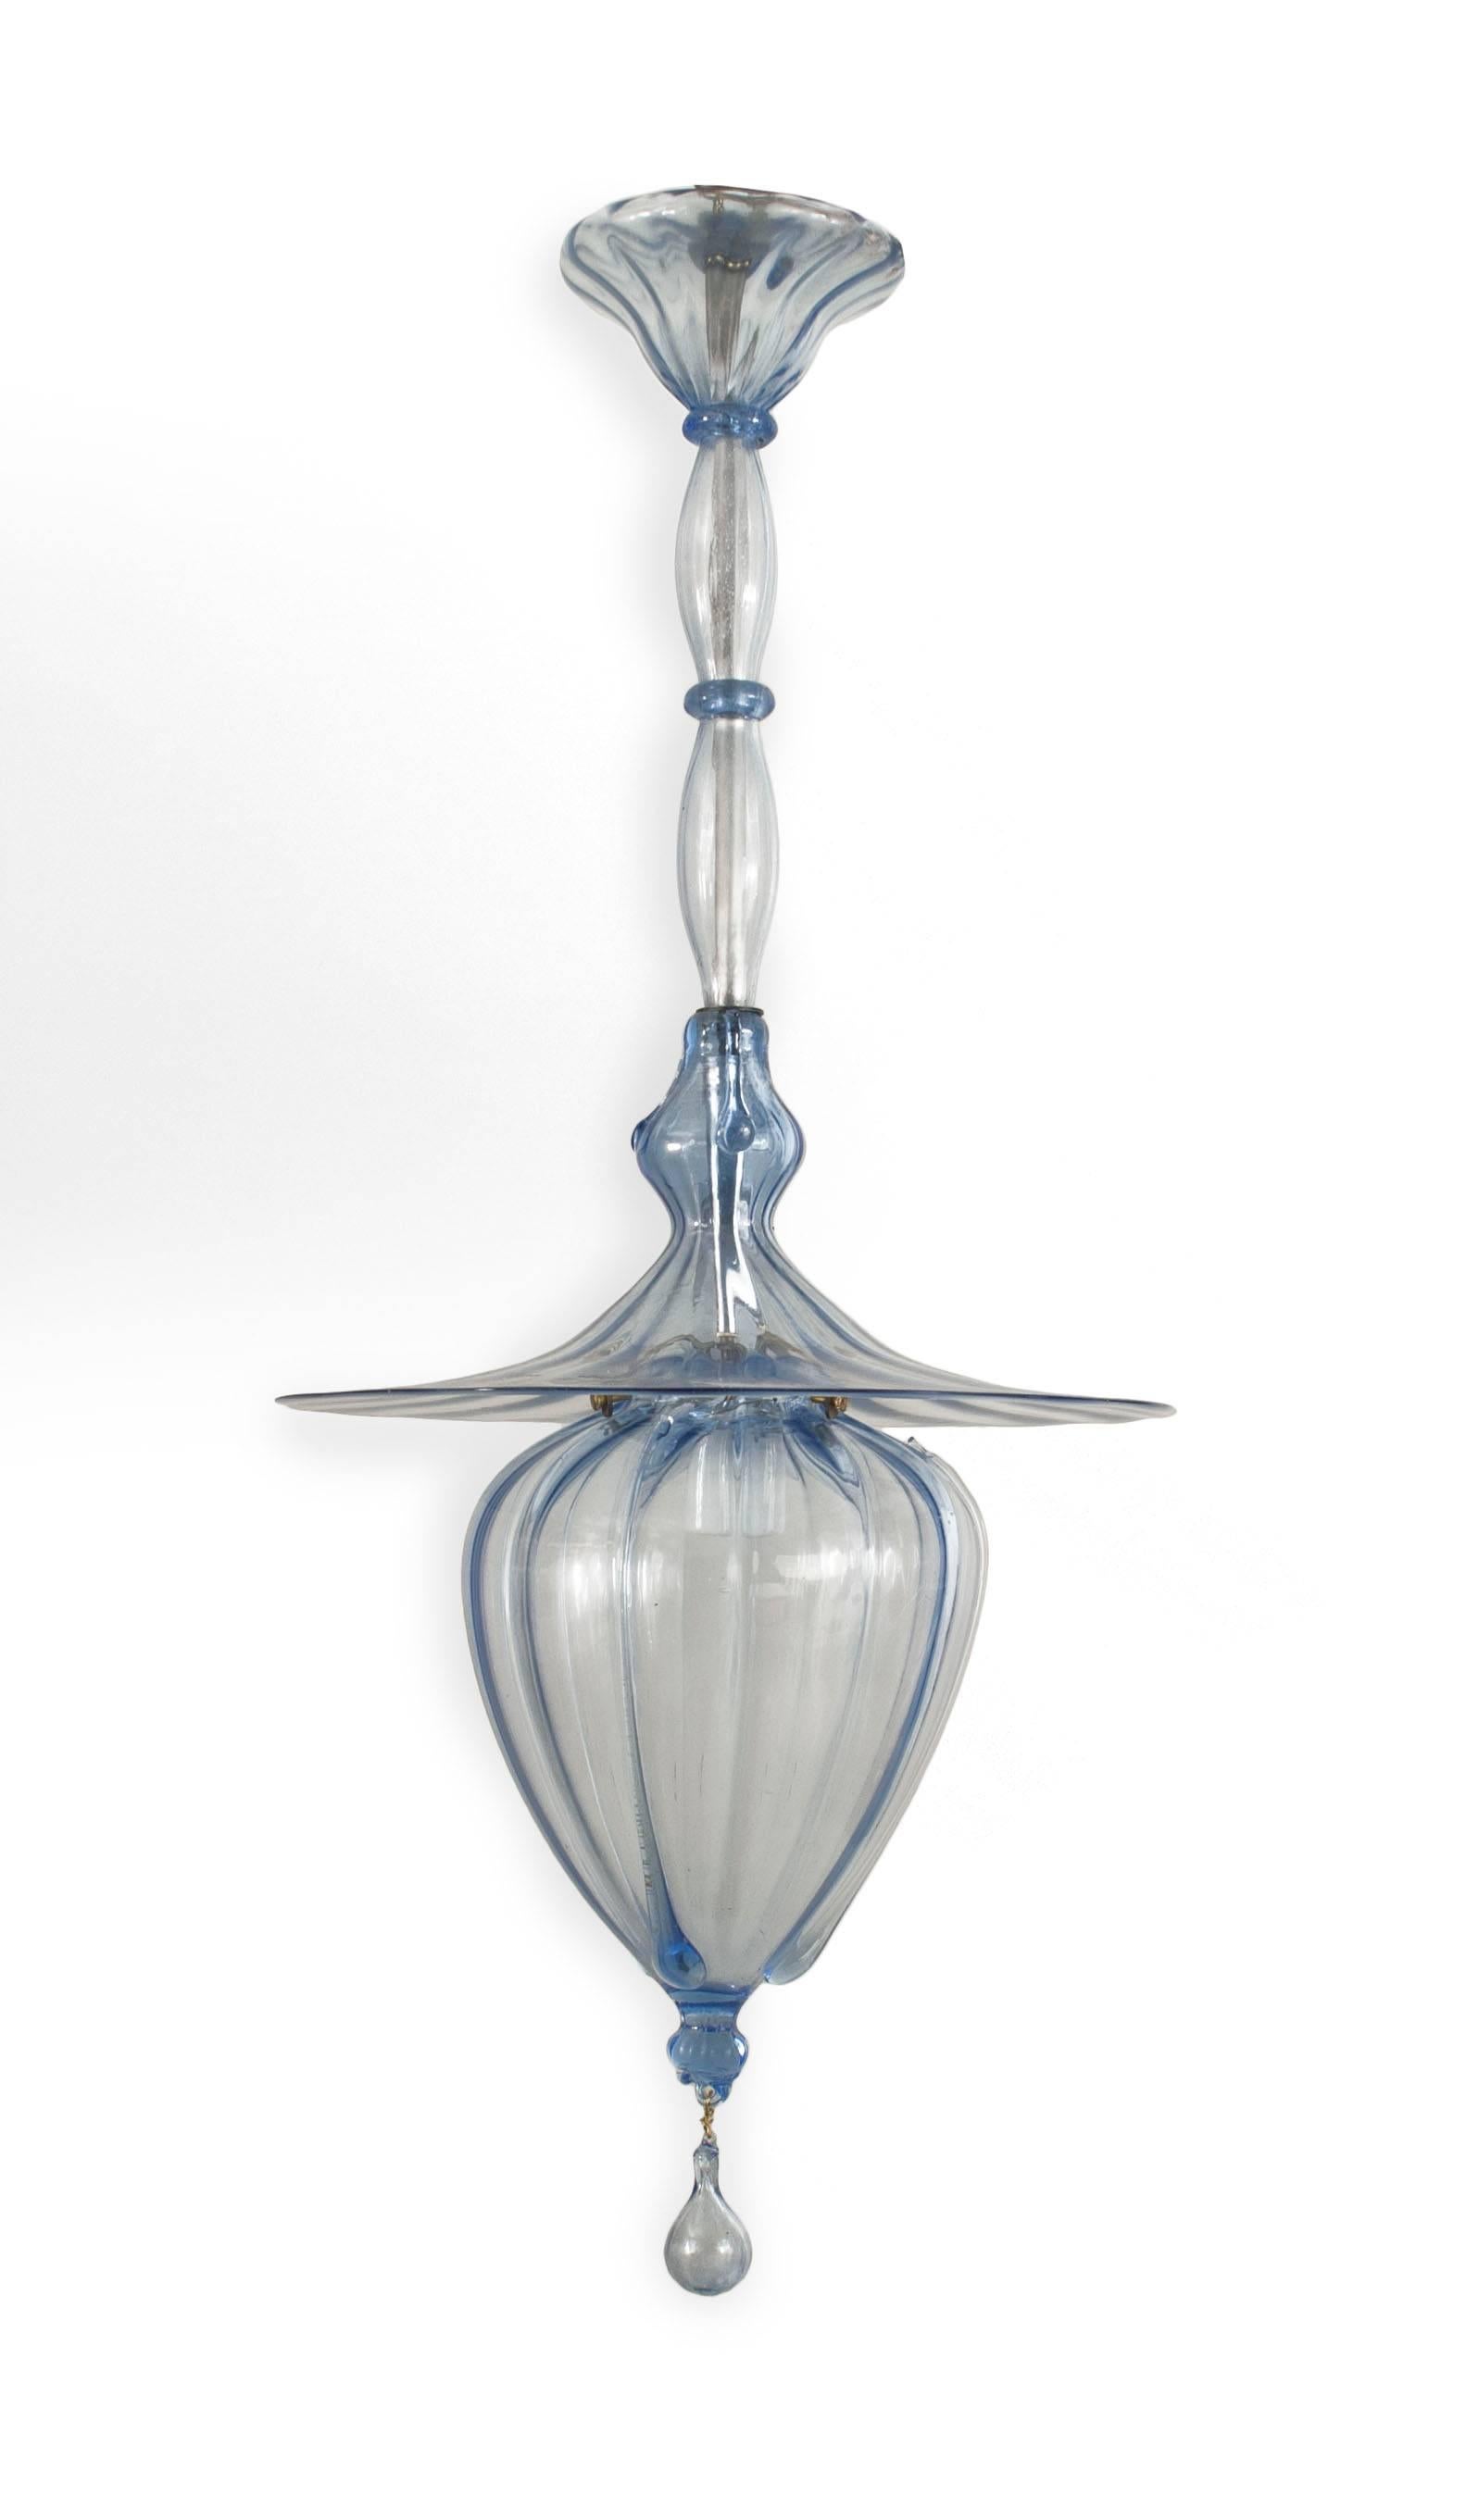 Italian 1940s tinted blue glass bulbous form fluted lantern under a large round glass shade and suspended from a tiered shaft with a finial bottom (by Venini).

 